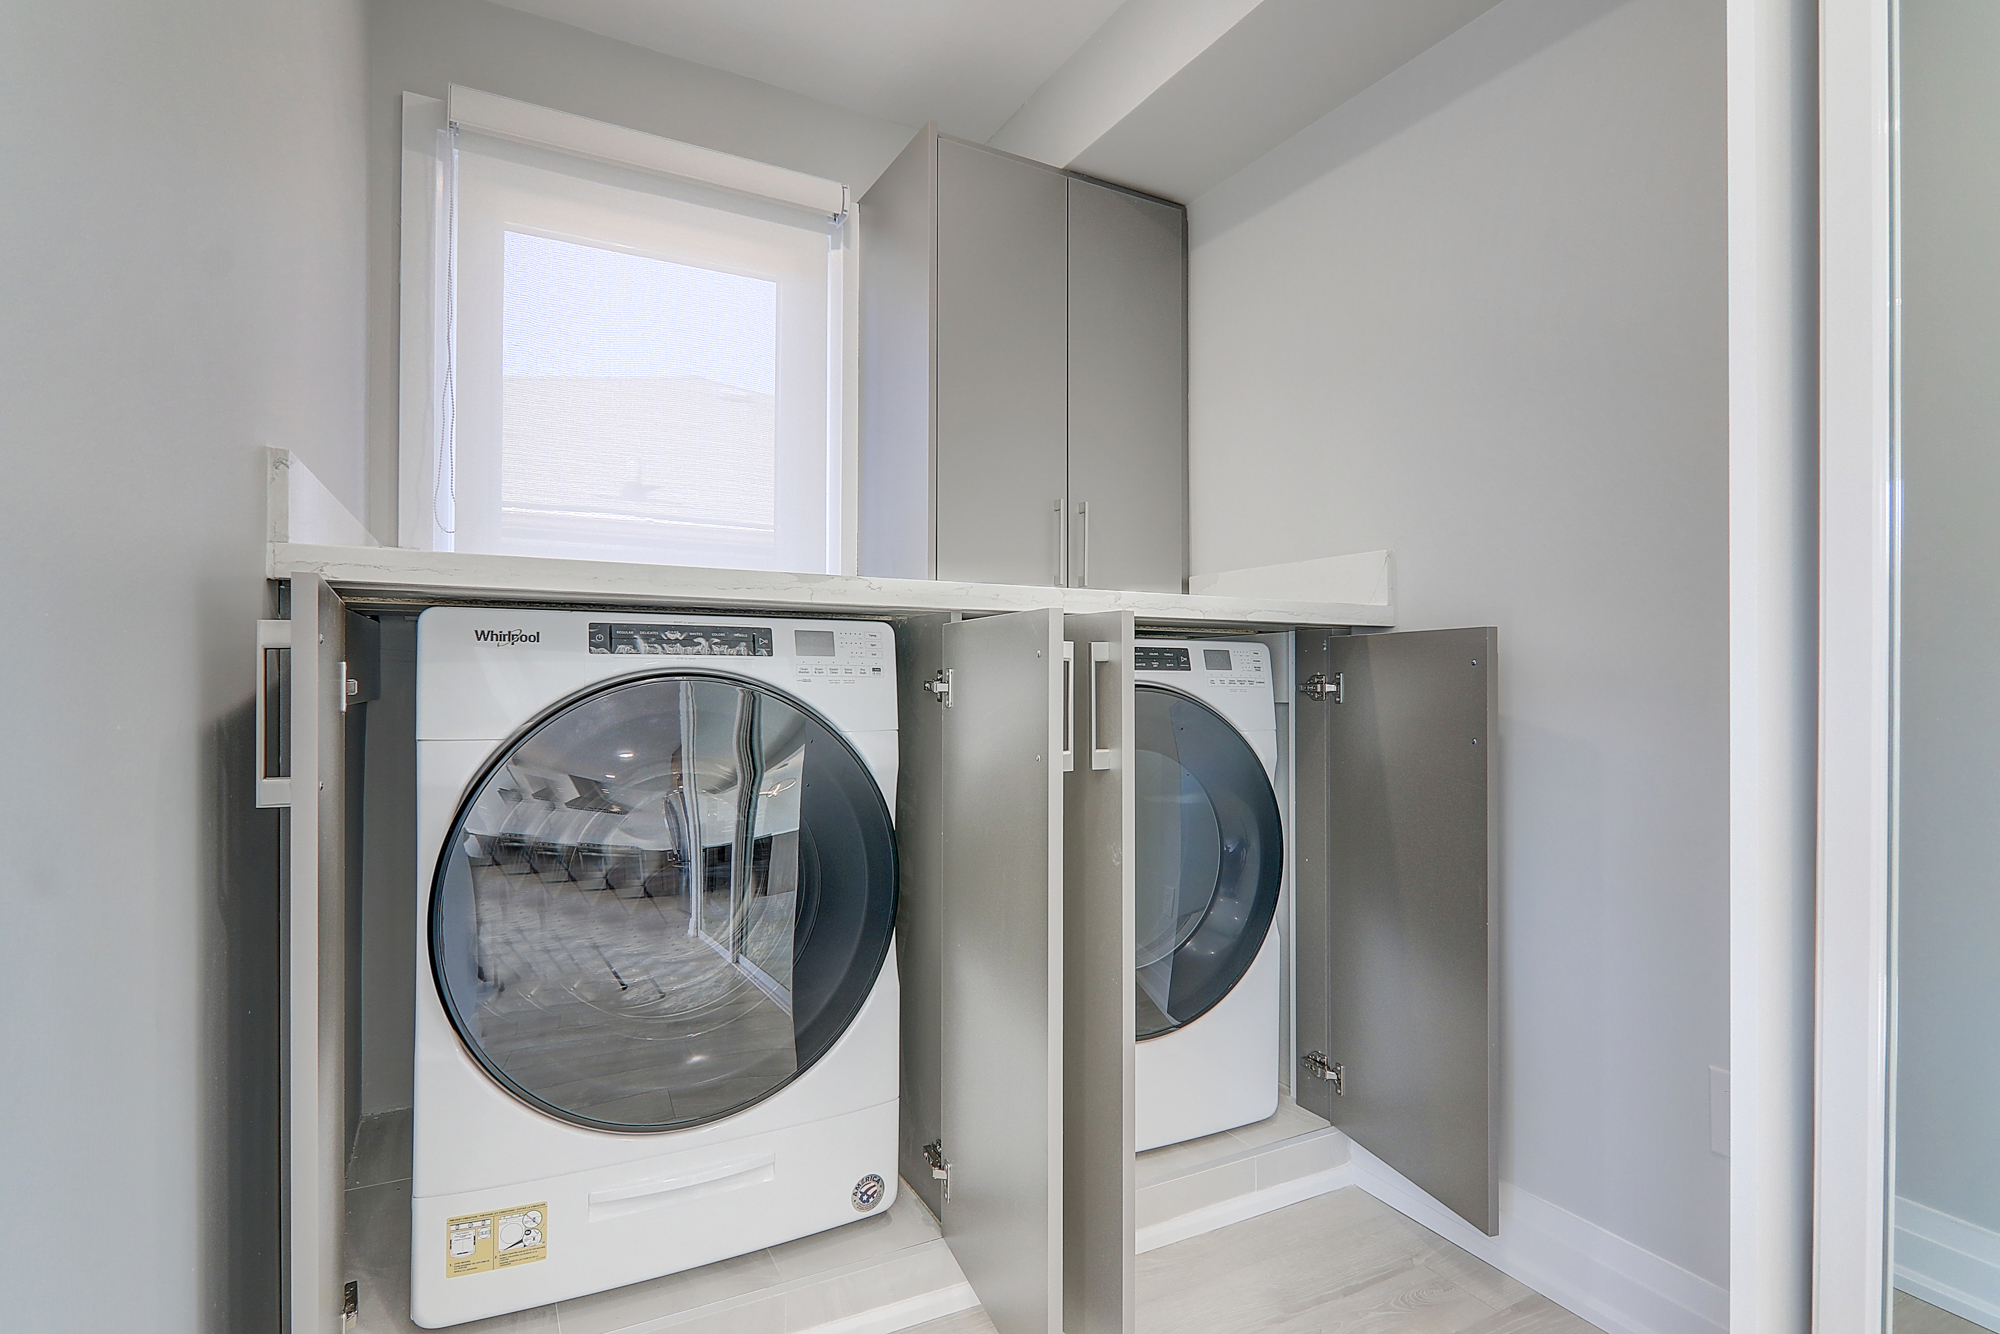 A washer and dryer in a laundry room